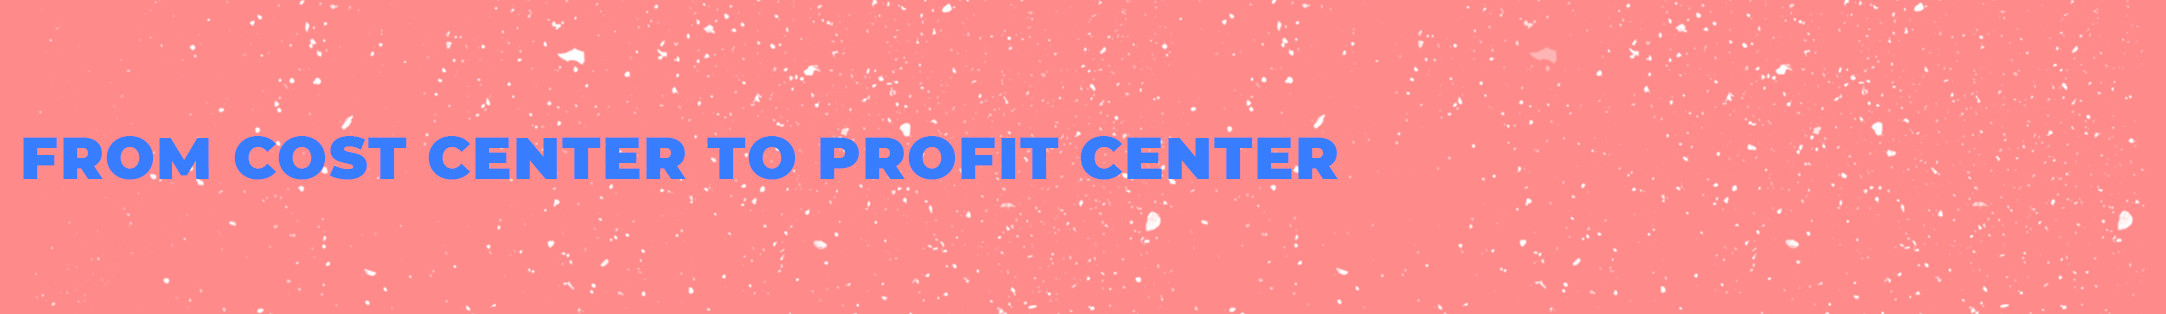 From Cost Center to Profit Center